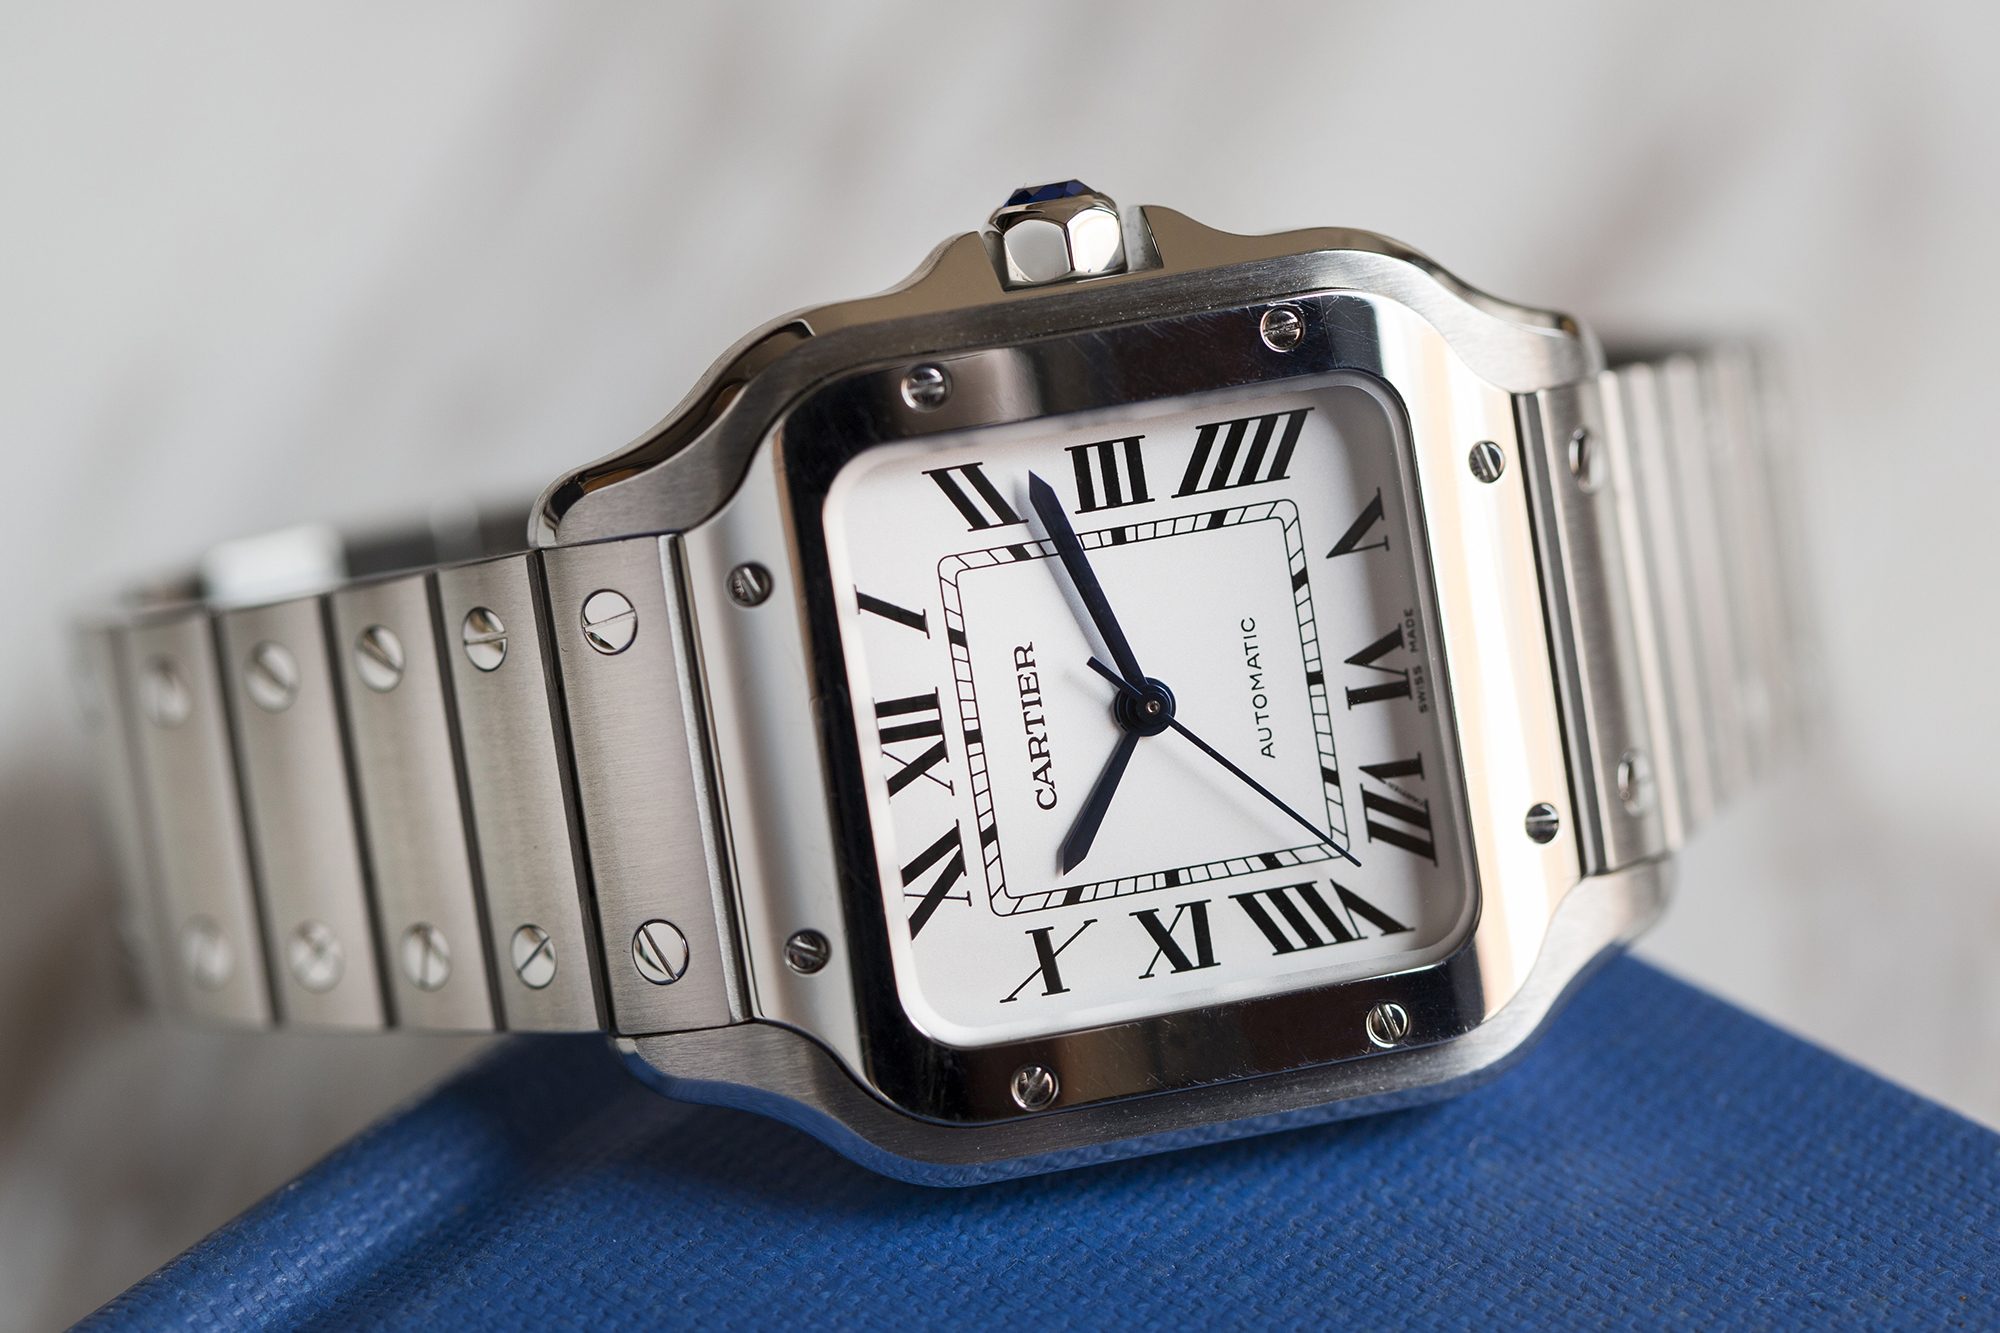 cartier watch keeps stopping